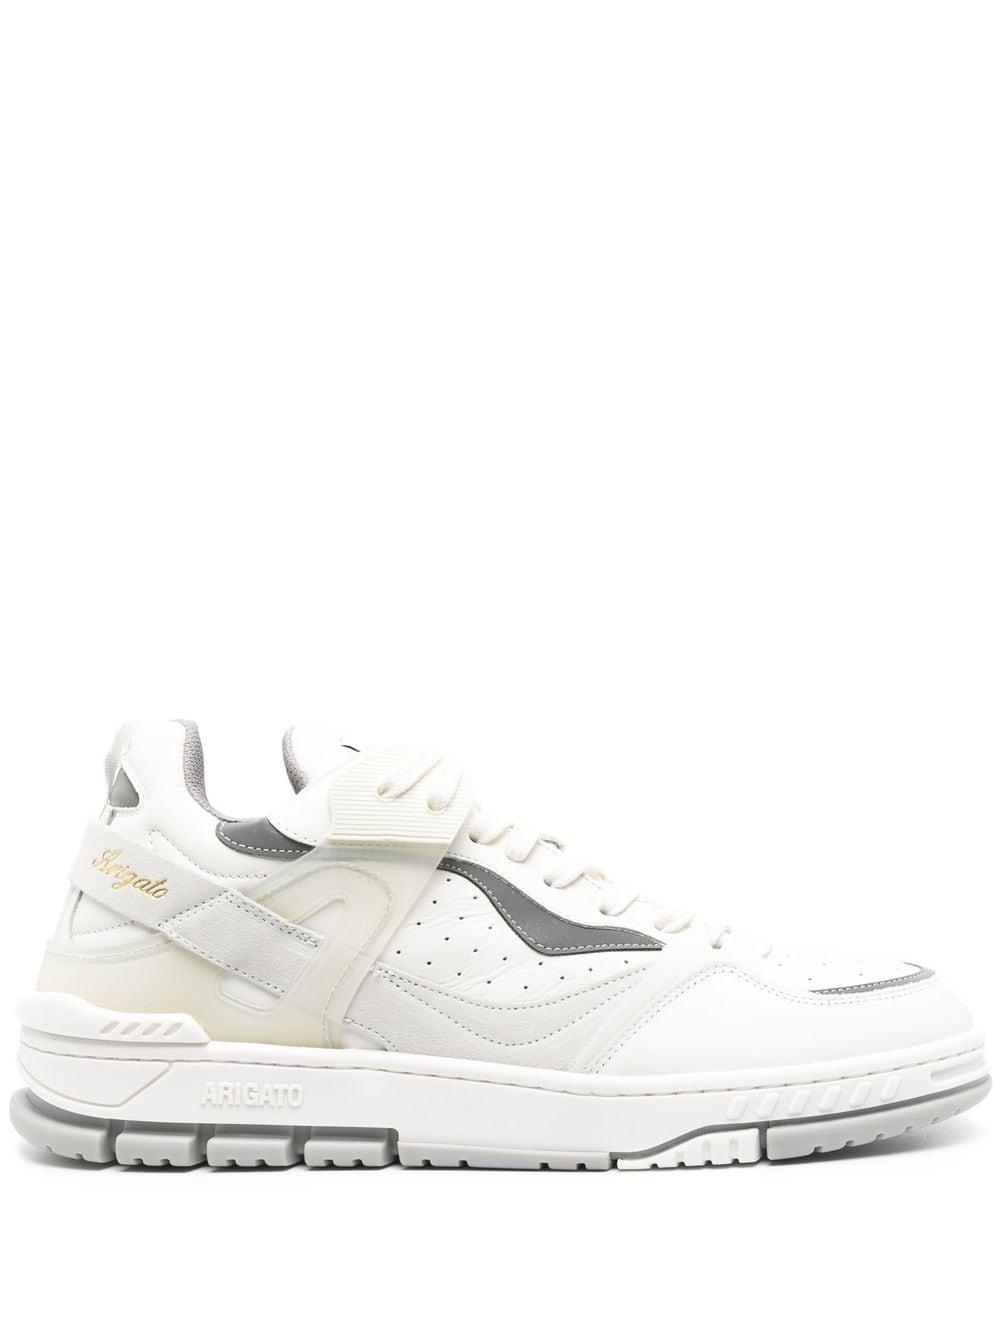 Axel Arigato Astro Low-top Sneakers in White for Men | Lyst